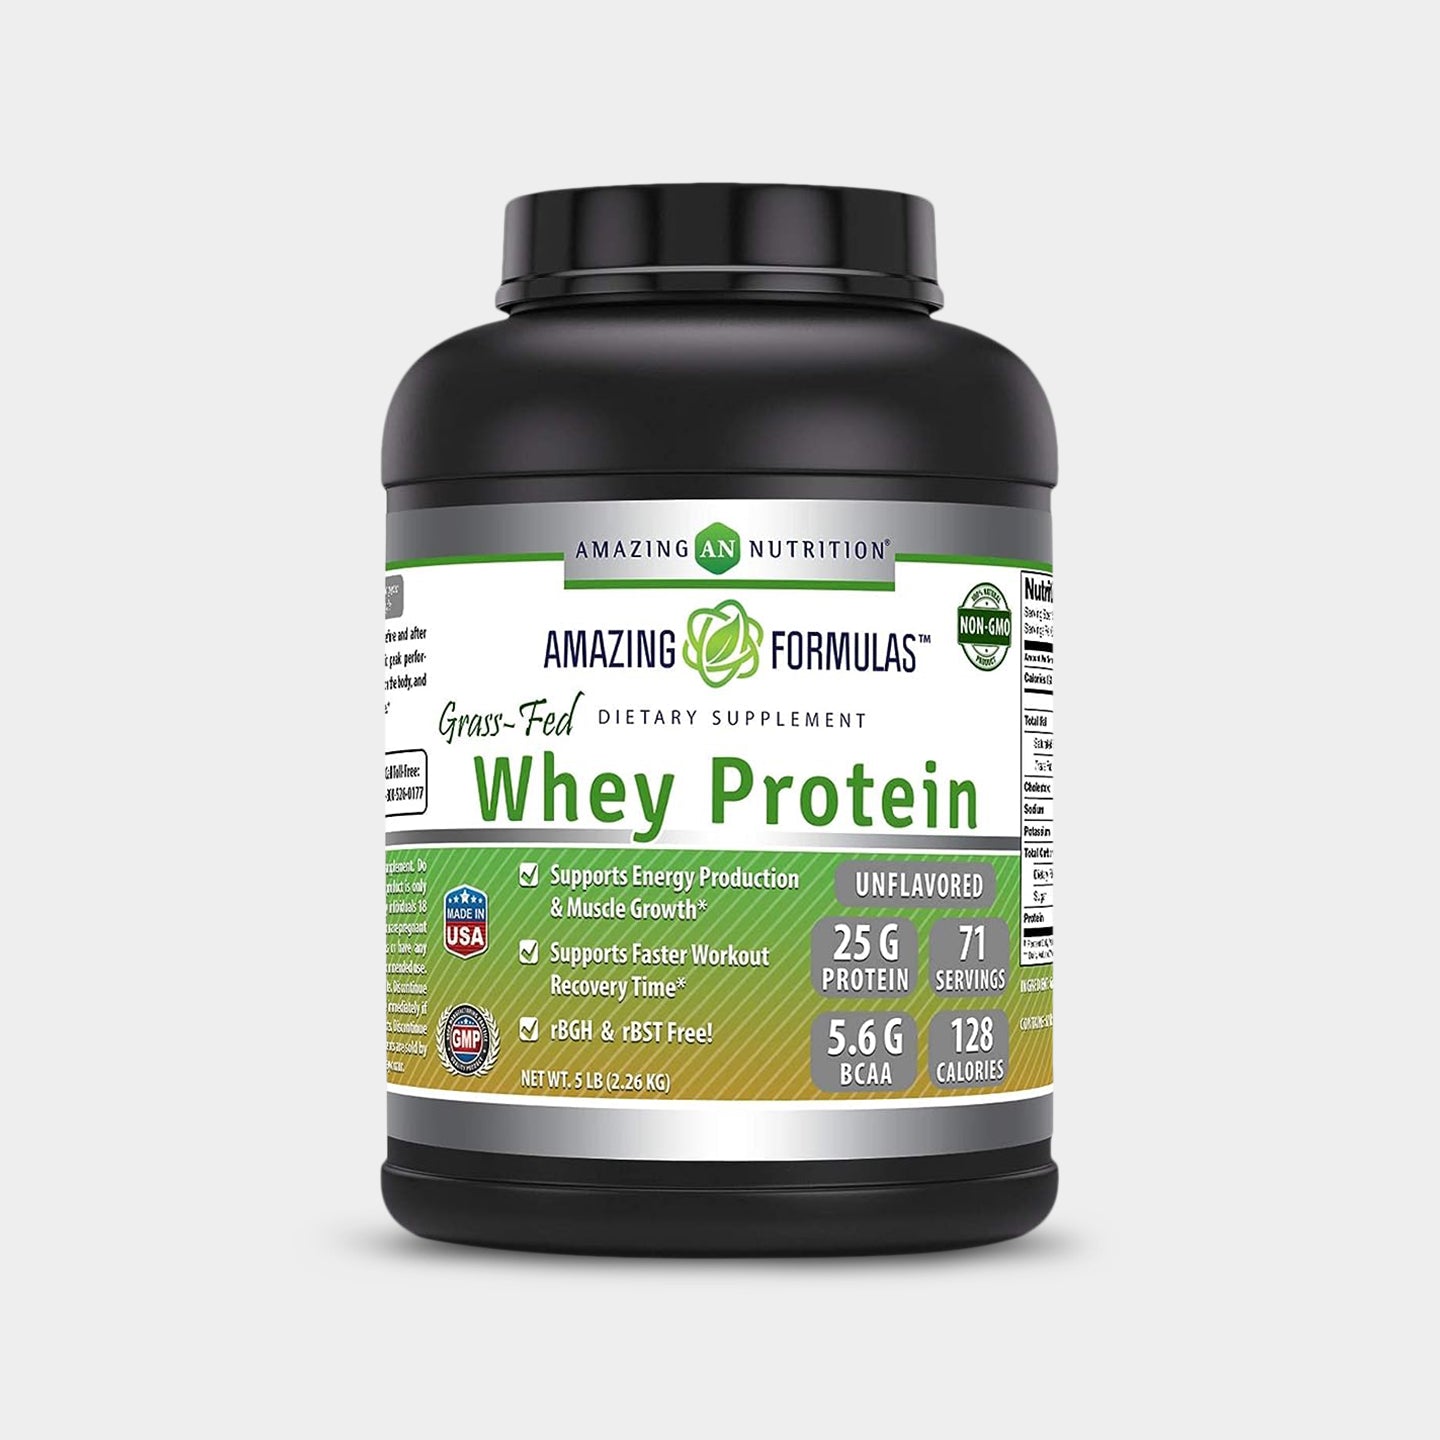 Amazing Formulas Grass-Fed Whey Protein, Unflavored, 5 Lbs A1